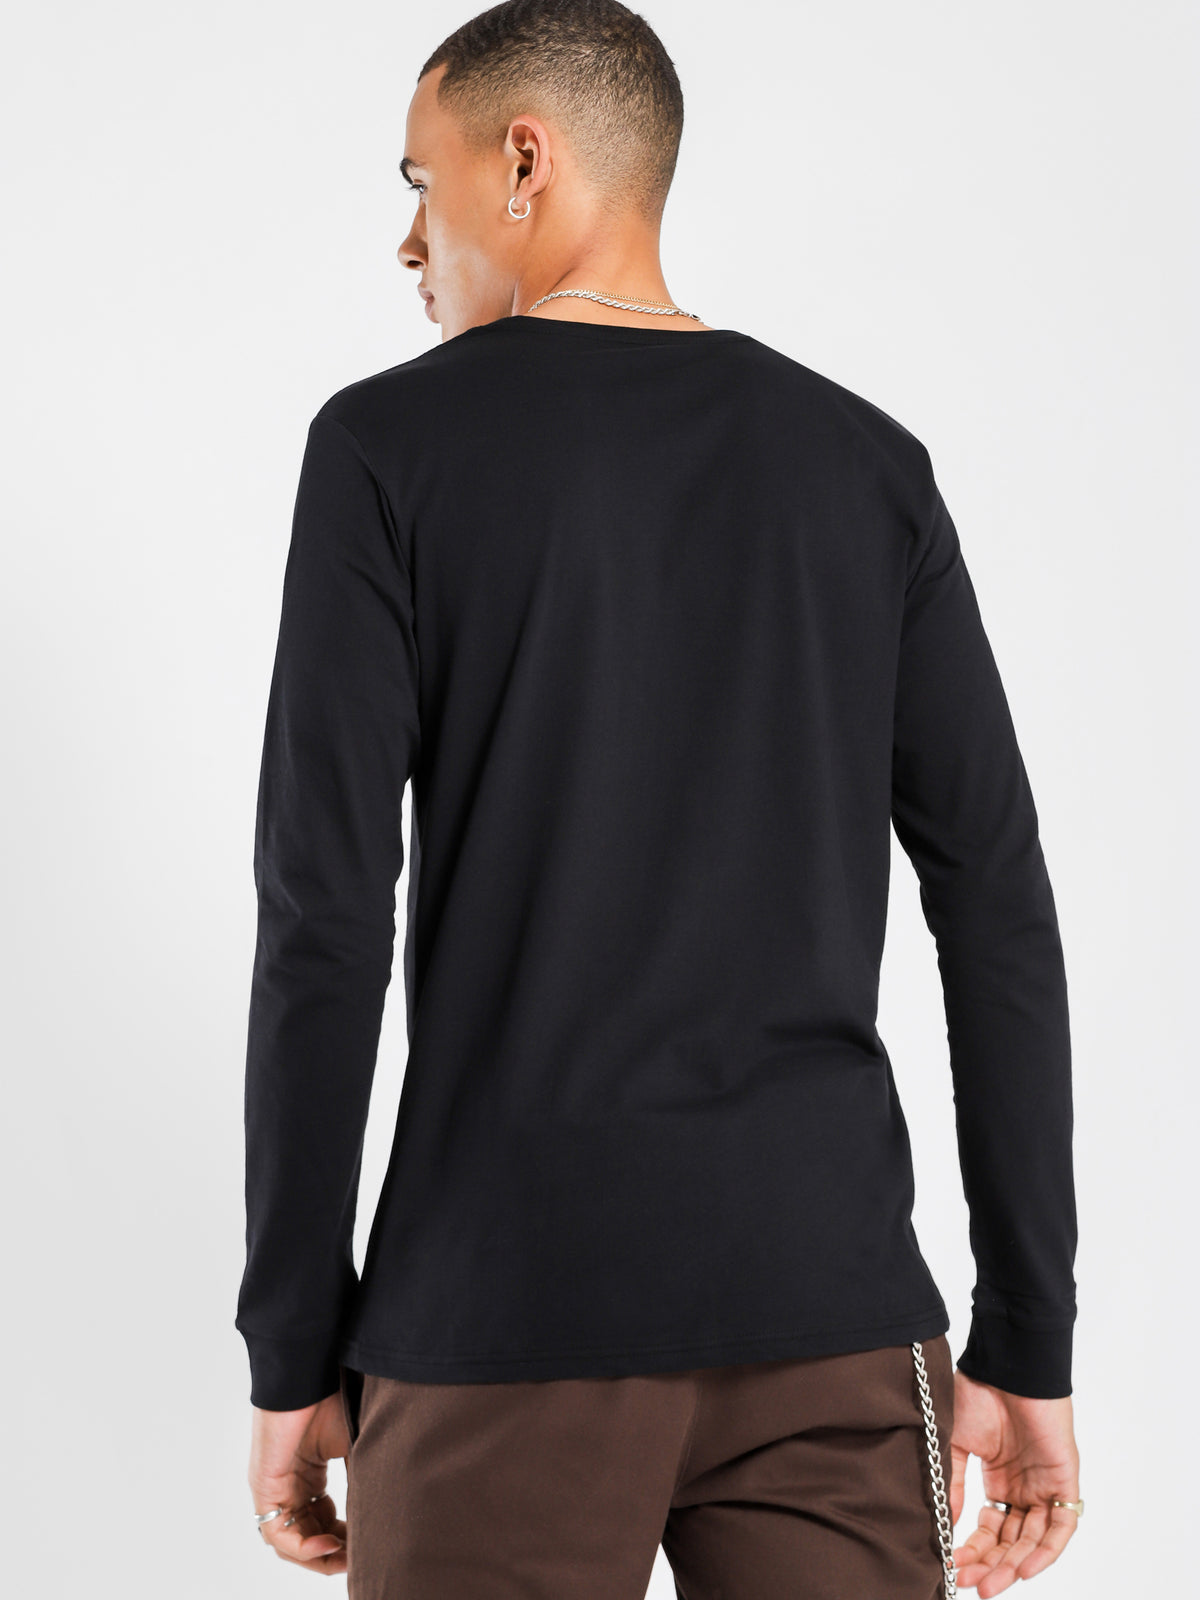 Contra Long Sleeved Shirt in Black